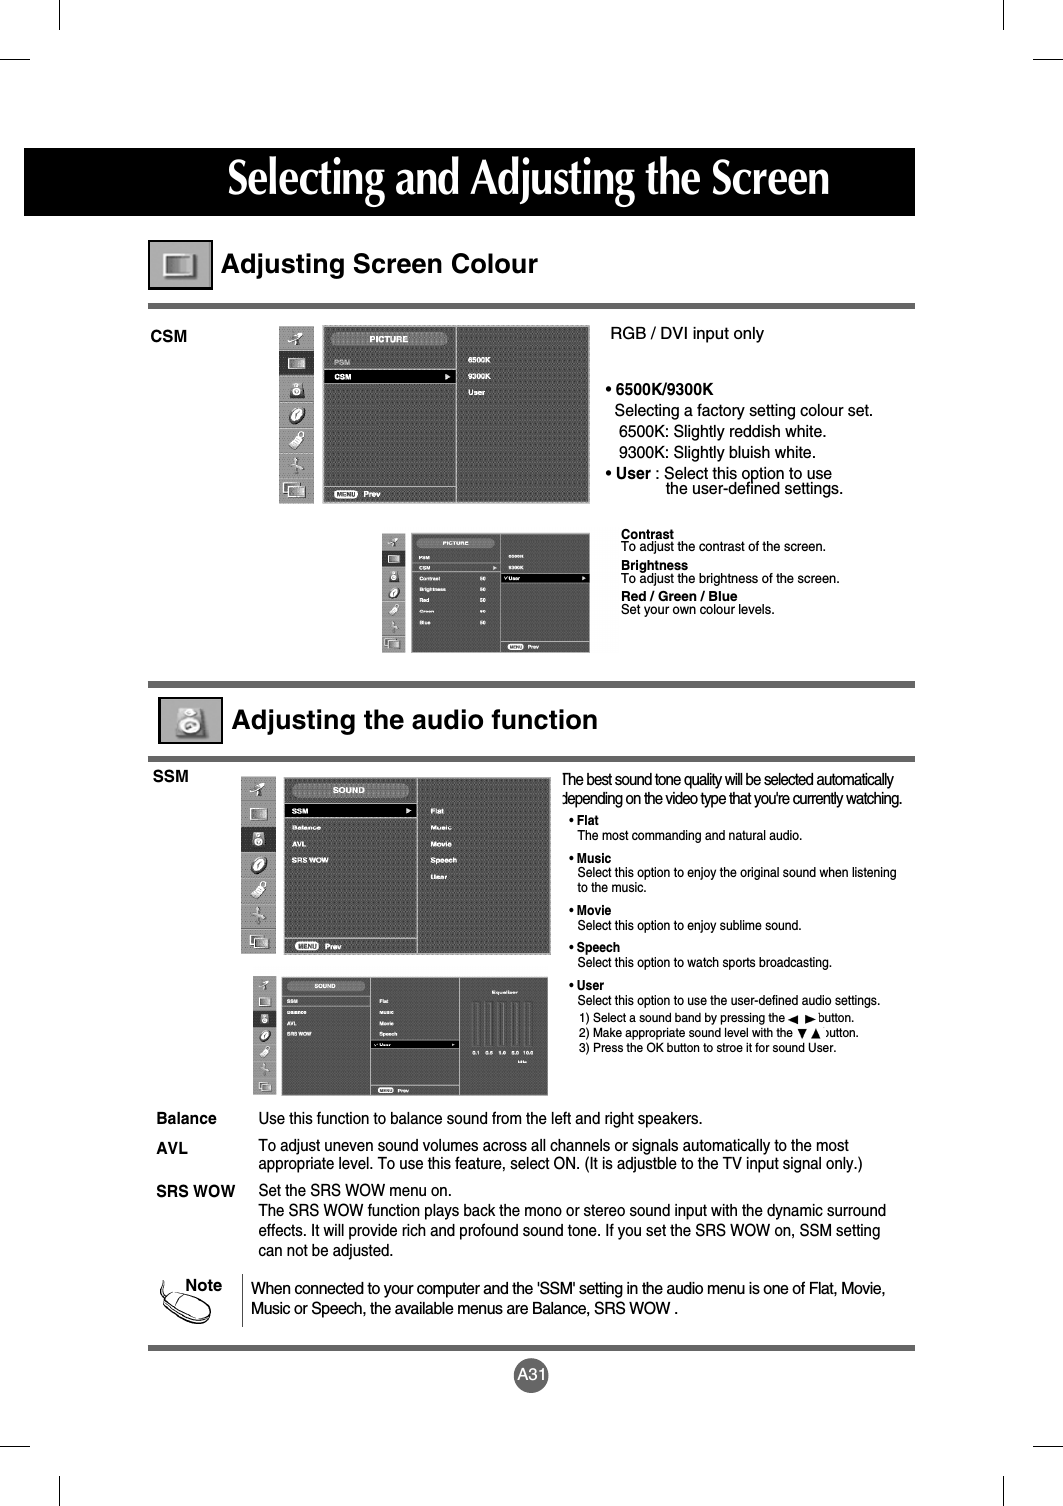 A31Selecting and Adjusting the ScreenContrast To adjust the contrast of the screen.BrightnessTo adjust the brightness of the screen.Red / Green / BlueSet your own colour levels.RGB / DVI input only• 6500K/9300KSelecting a factory setting colour set. 6500K: Slightly reddish white. 9300K: Slightly bluish white. • User : Select this option to use the user-defined settings.CSMAdjusting Screen ColourThe best sound tone quality will be selected automaticallydepending on the video type that you&apos;re currently watching.SSMAdjusting the audio functionNoteWhen connected to your computer and the &apos;SSM&apos; setting in the audio menu is one of Flat, Movie,Music or Speech, the available menus are Balance, SRS WOW .Use this function to balance sound from the left and right speakers.To adjust uneven sound volumes across all channels or signals automatically to the mostappropriate level. To use this feature, select ON. (It is adjustble to the TV input signal only.)Set the SRS WOW menu on.The SRS WOW function plays back the mono or stereo sound input with the dynamic surroundeffects. It will provide rich and profound sound tone. If you set the SRS WOW on, SSM settingcan not be adjusted.BalanceAVLSRS WOW• FlatThe most commanding and natural audio.• MusicSelect this option to enjoy the original sound when listening to the music.• MovieSelect this option to enjoy sublime sound.• SpeechSelect this option to watch sports broadcasting.• UserSelect this option to use the user-defined audio settings.1) Select a sound band by pressing the          button.2) Make appropriate sound level with the         button.3) Press the OK button to stroe it for sound User.